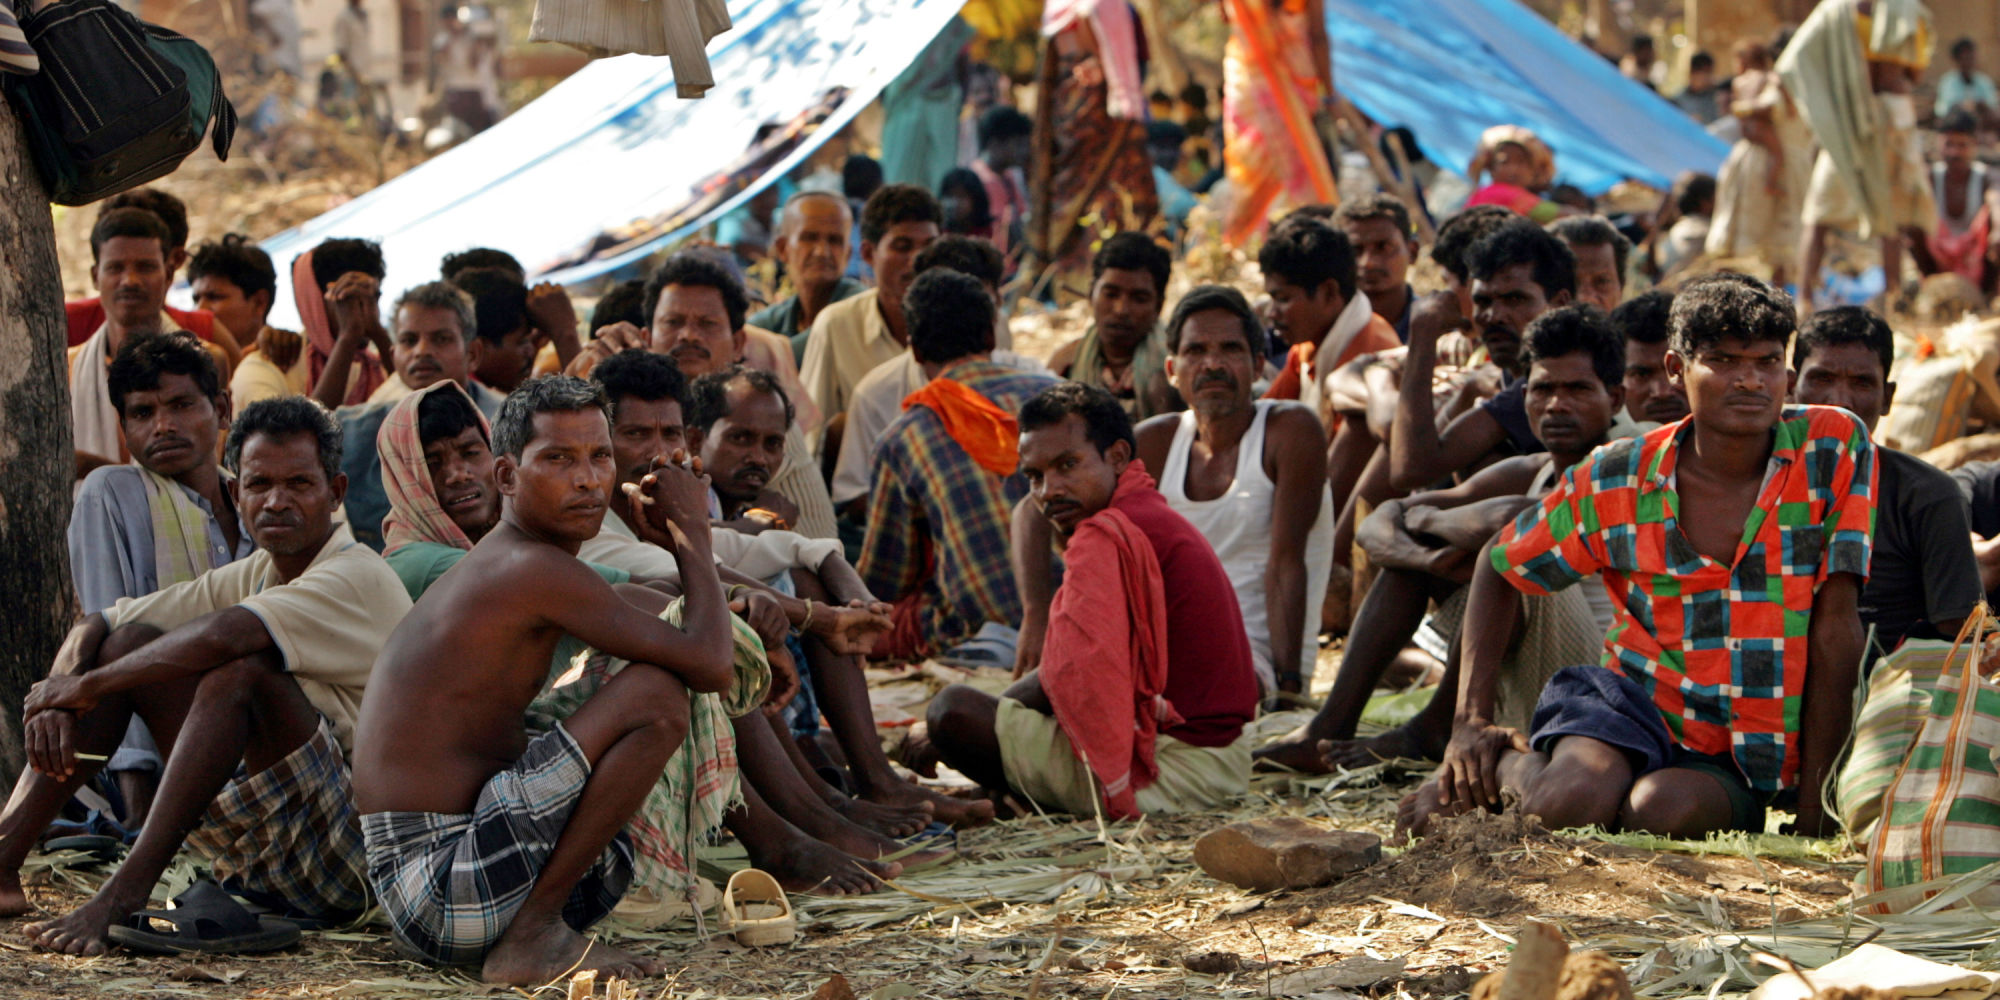 Indian tribal people sit at a relief camp in Dharbaguda, in the central state of Chhattisgarh, March 8, 2006. Violence in Chhattisgarh, one of India's poorest states, has mounted since the state government set up and started funding an anti-Maoist movement. Picture taken March 8, 2006.   REUTERS/Kamal Kishore